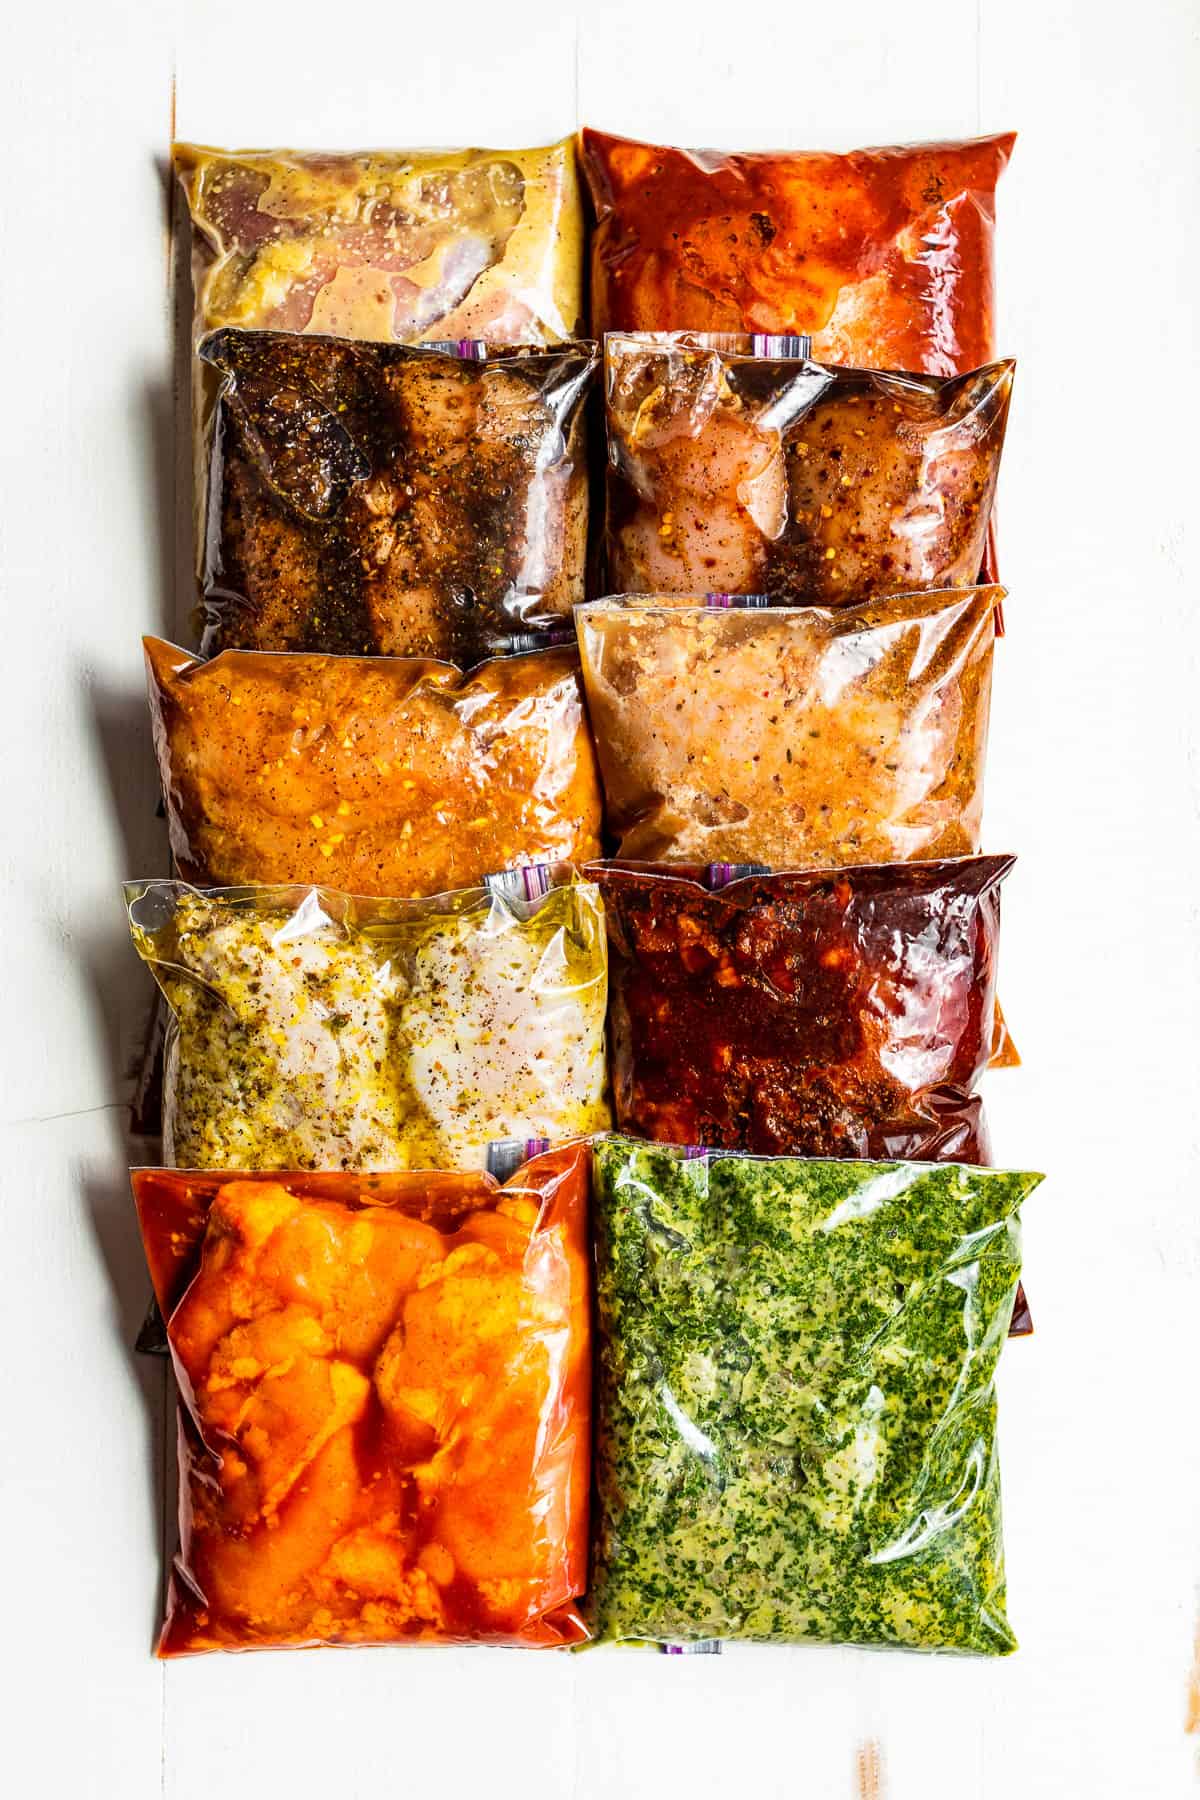 Ten different chicken marinades in bags on a white background.